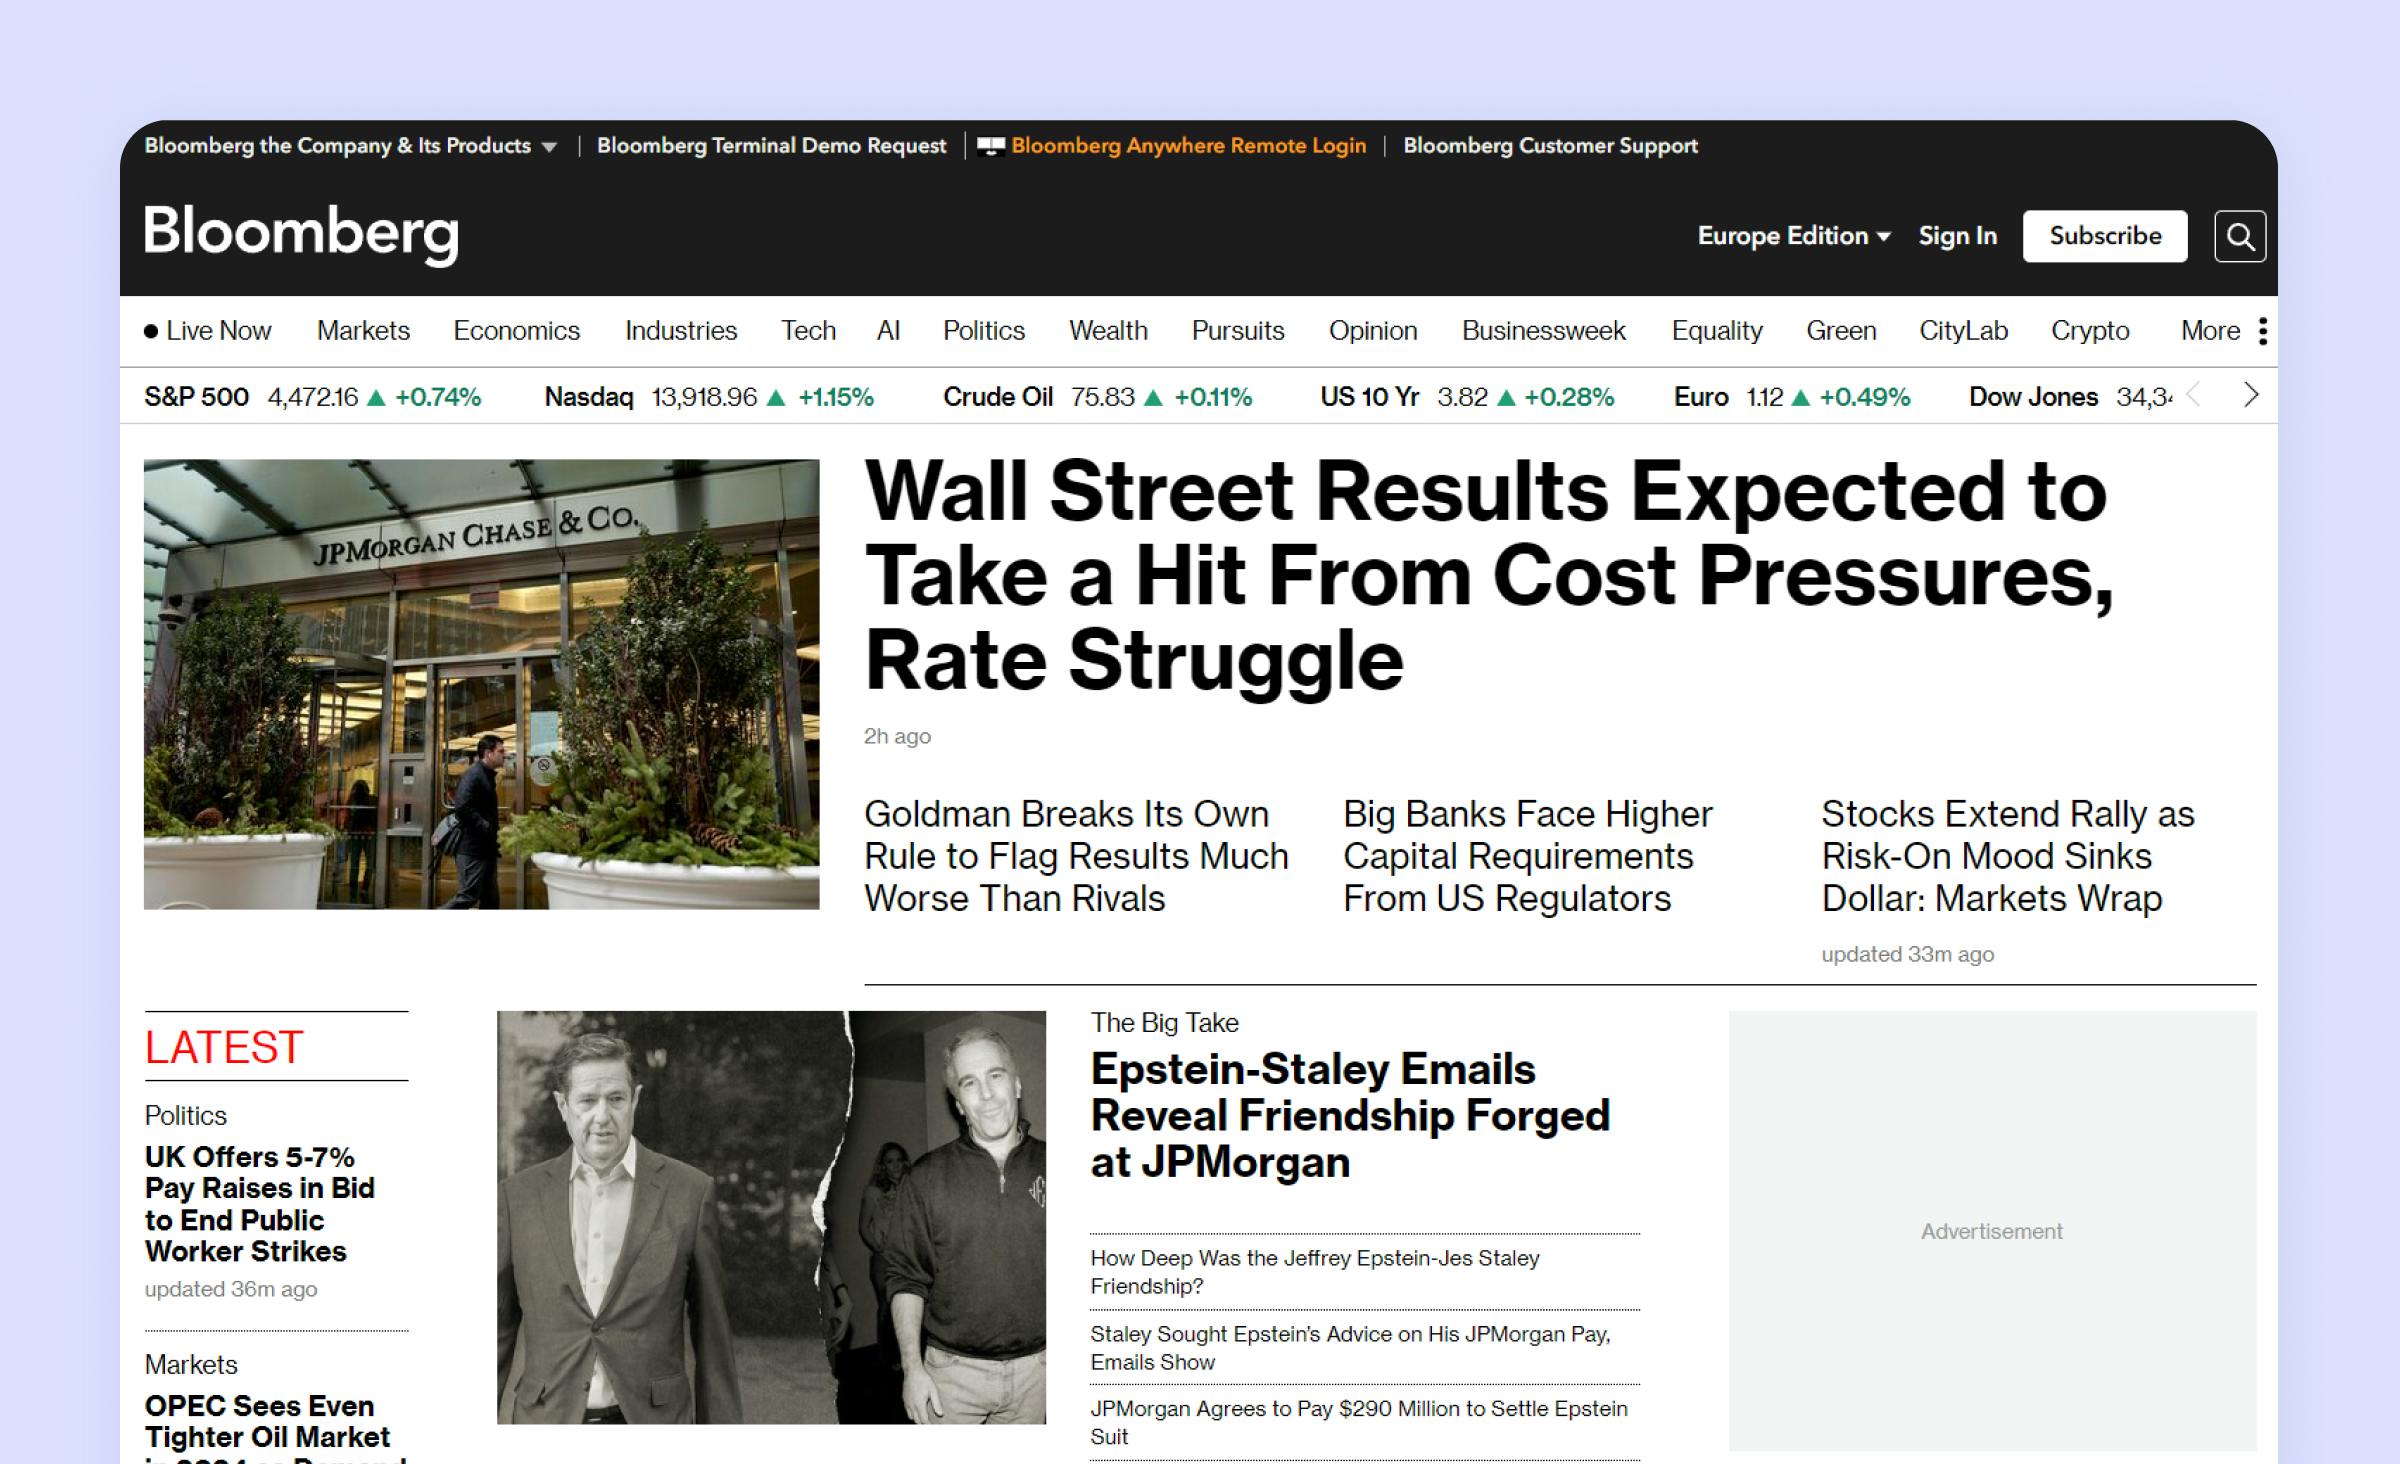 How web development services for small businesses can help you build a platform like Bloomberg